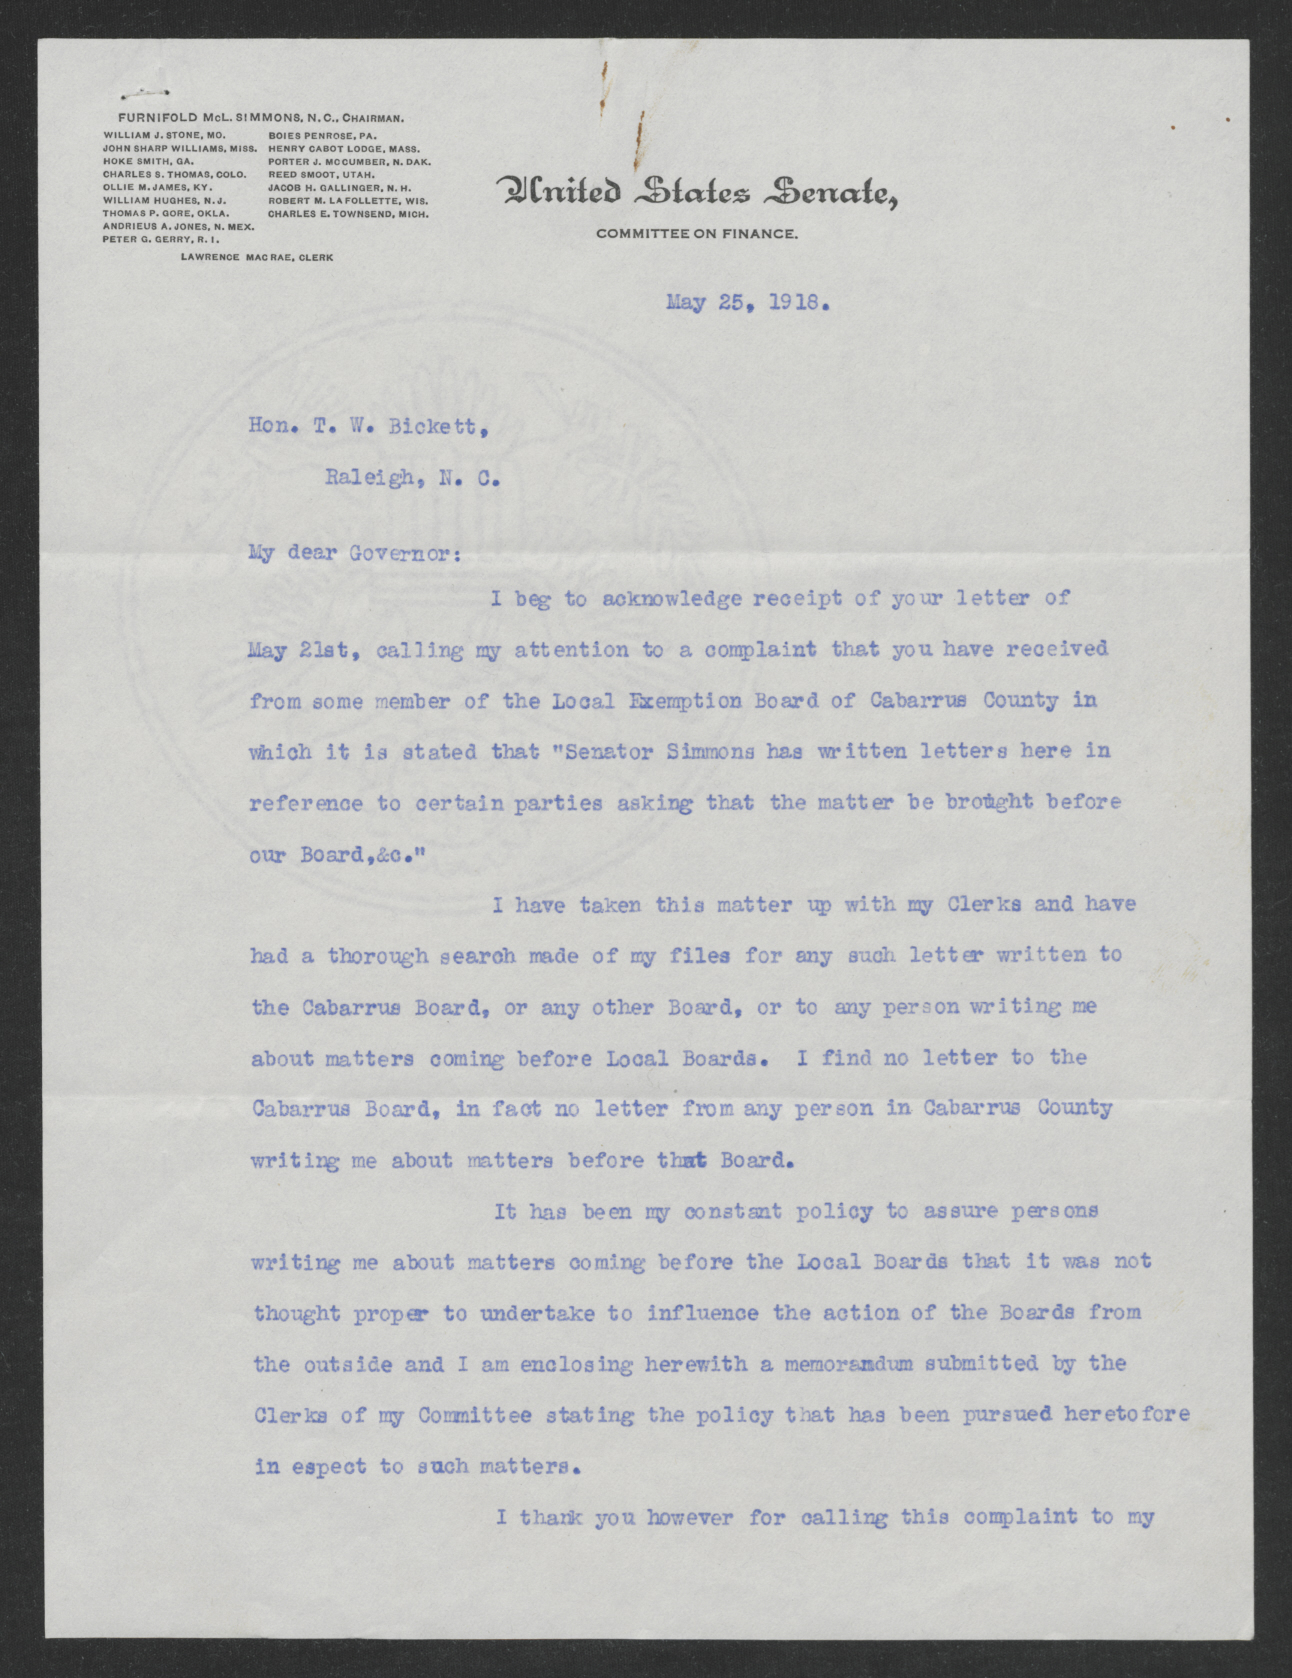 Letter from Furnifold M. Simmons to Thomas W. Bickett, May 25, 1918, page 1